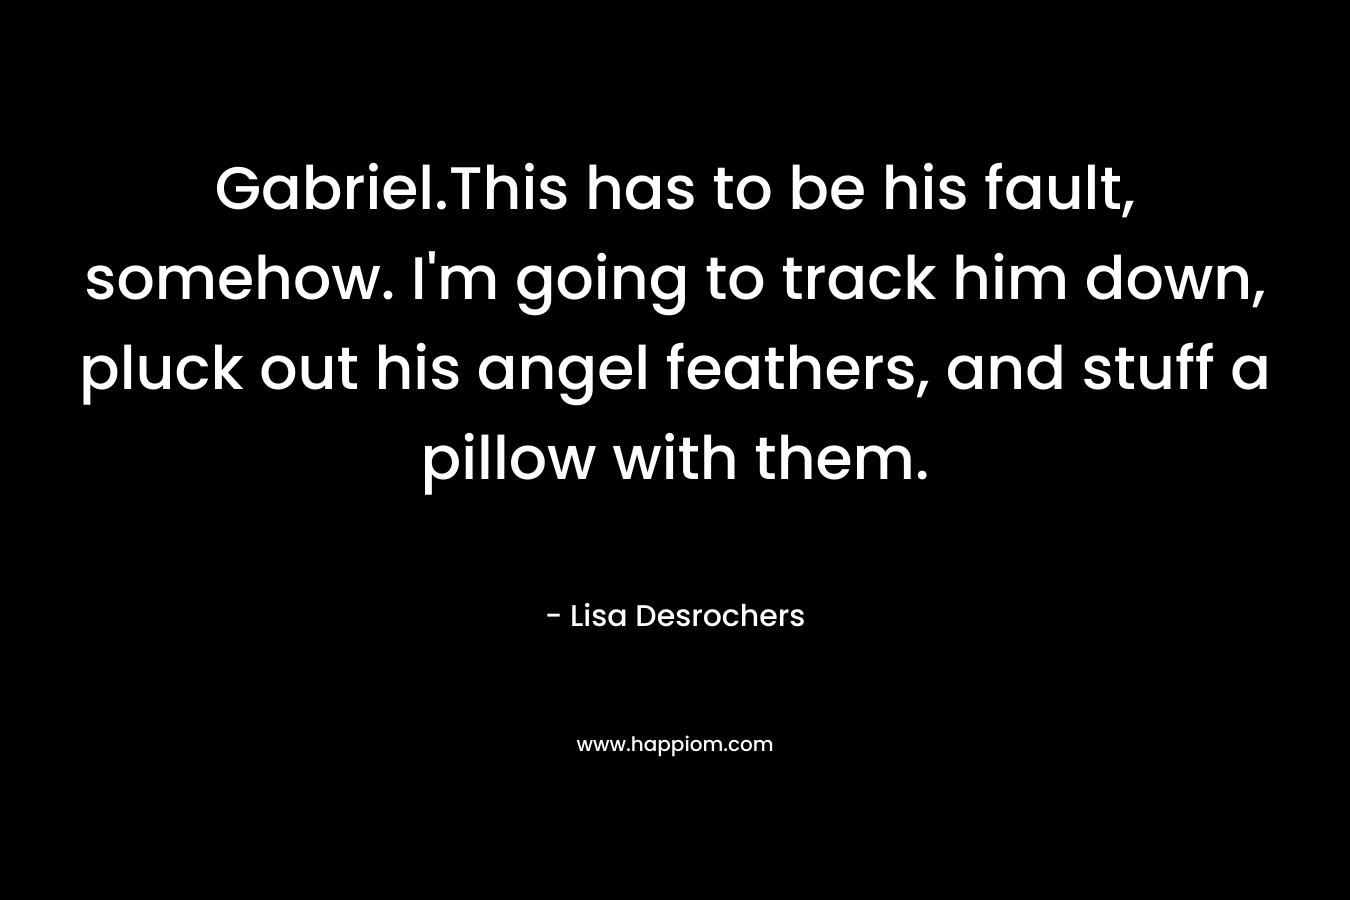 Gabriel.This has to be his fault, somehow. I’m going to track him down, pluck out his angel feathers, and stuff a pillow with them. – Lisa Desrochers